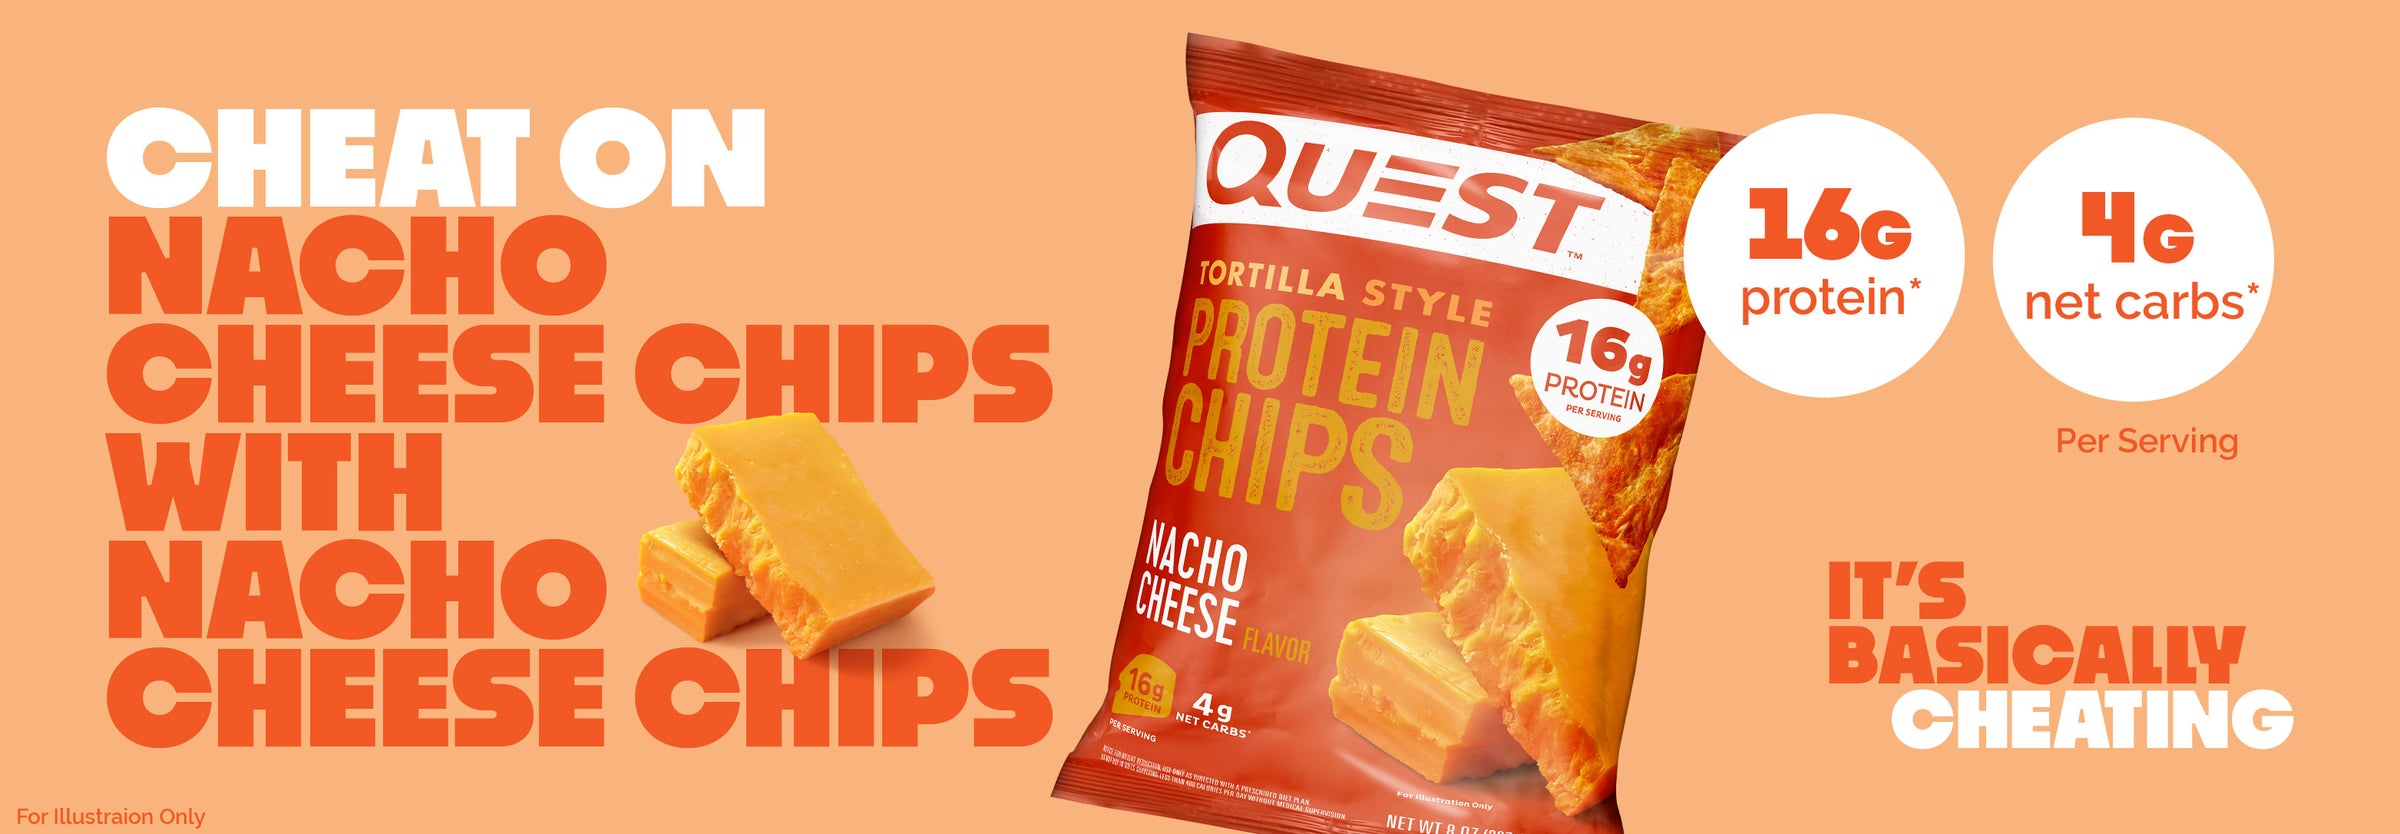 Cheat on Nacho Cheese Chips with Nacho Cheese Chips. 16g protein, 4g net carbs.